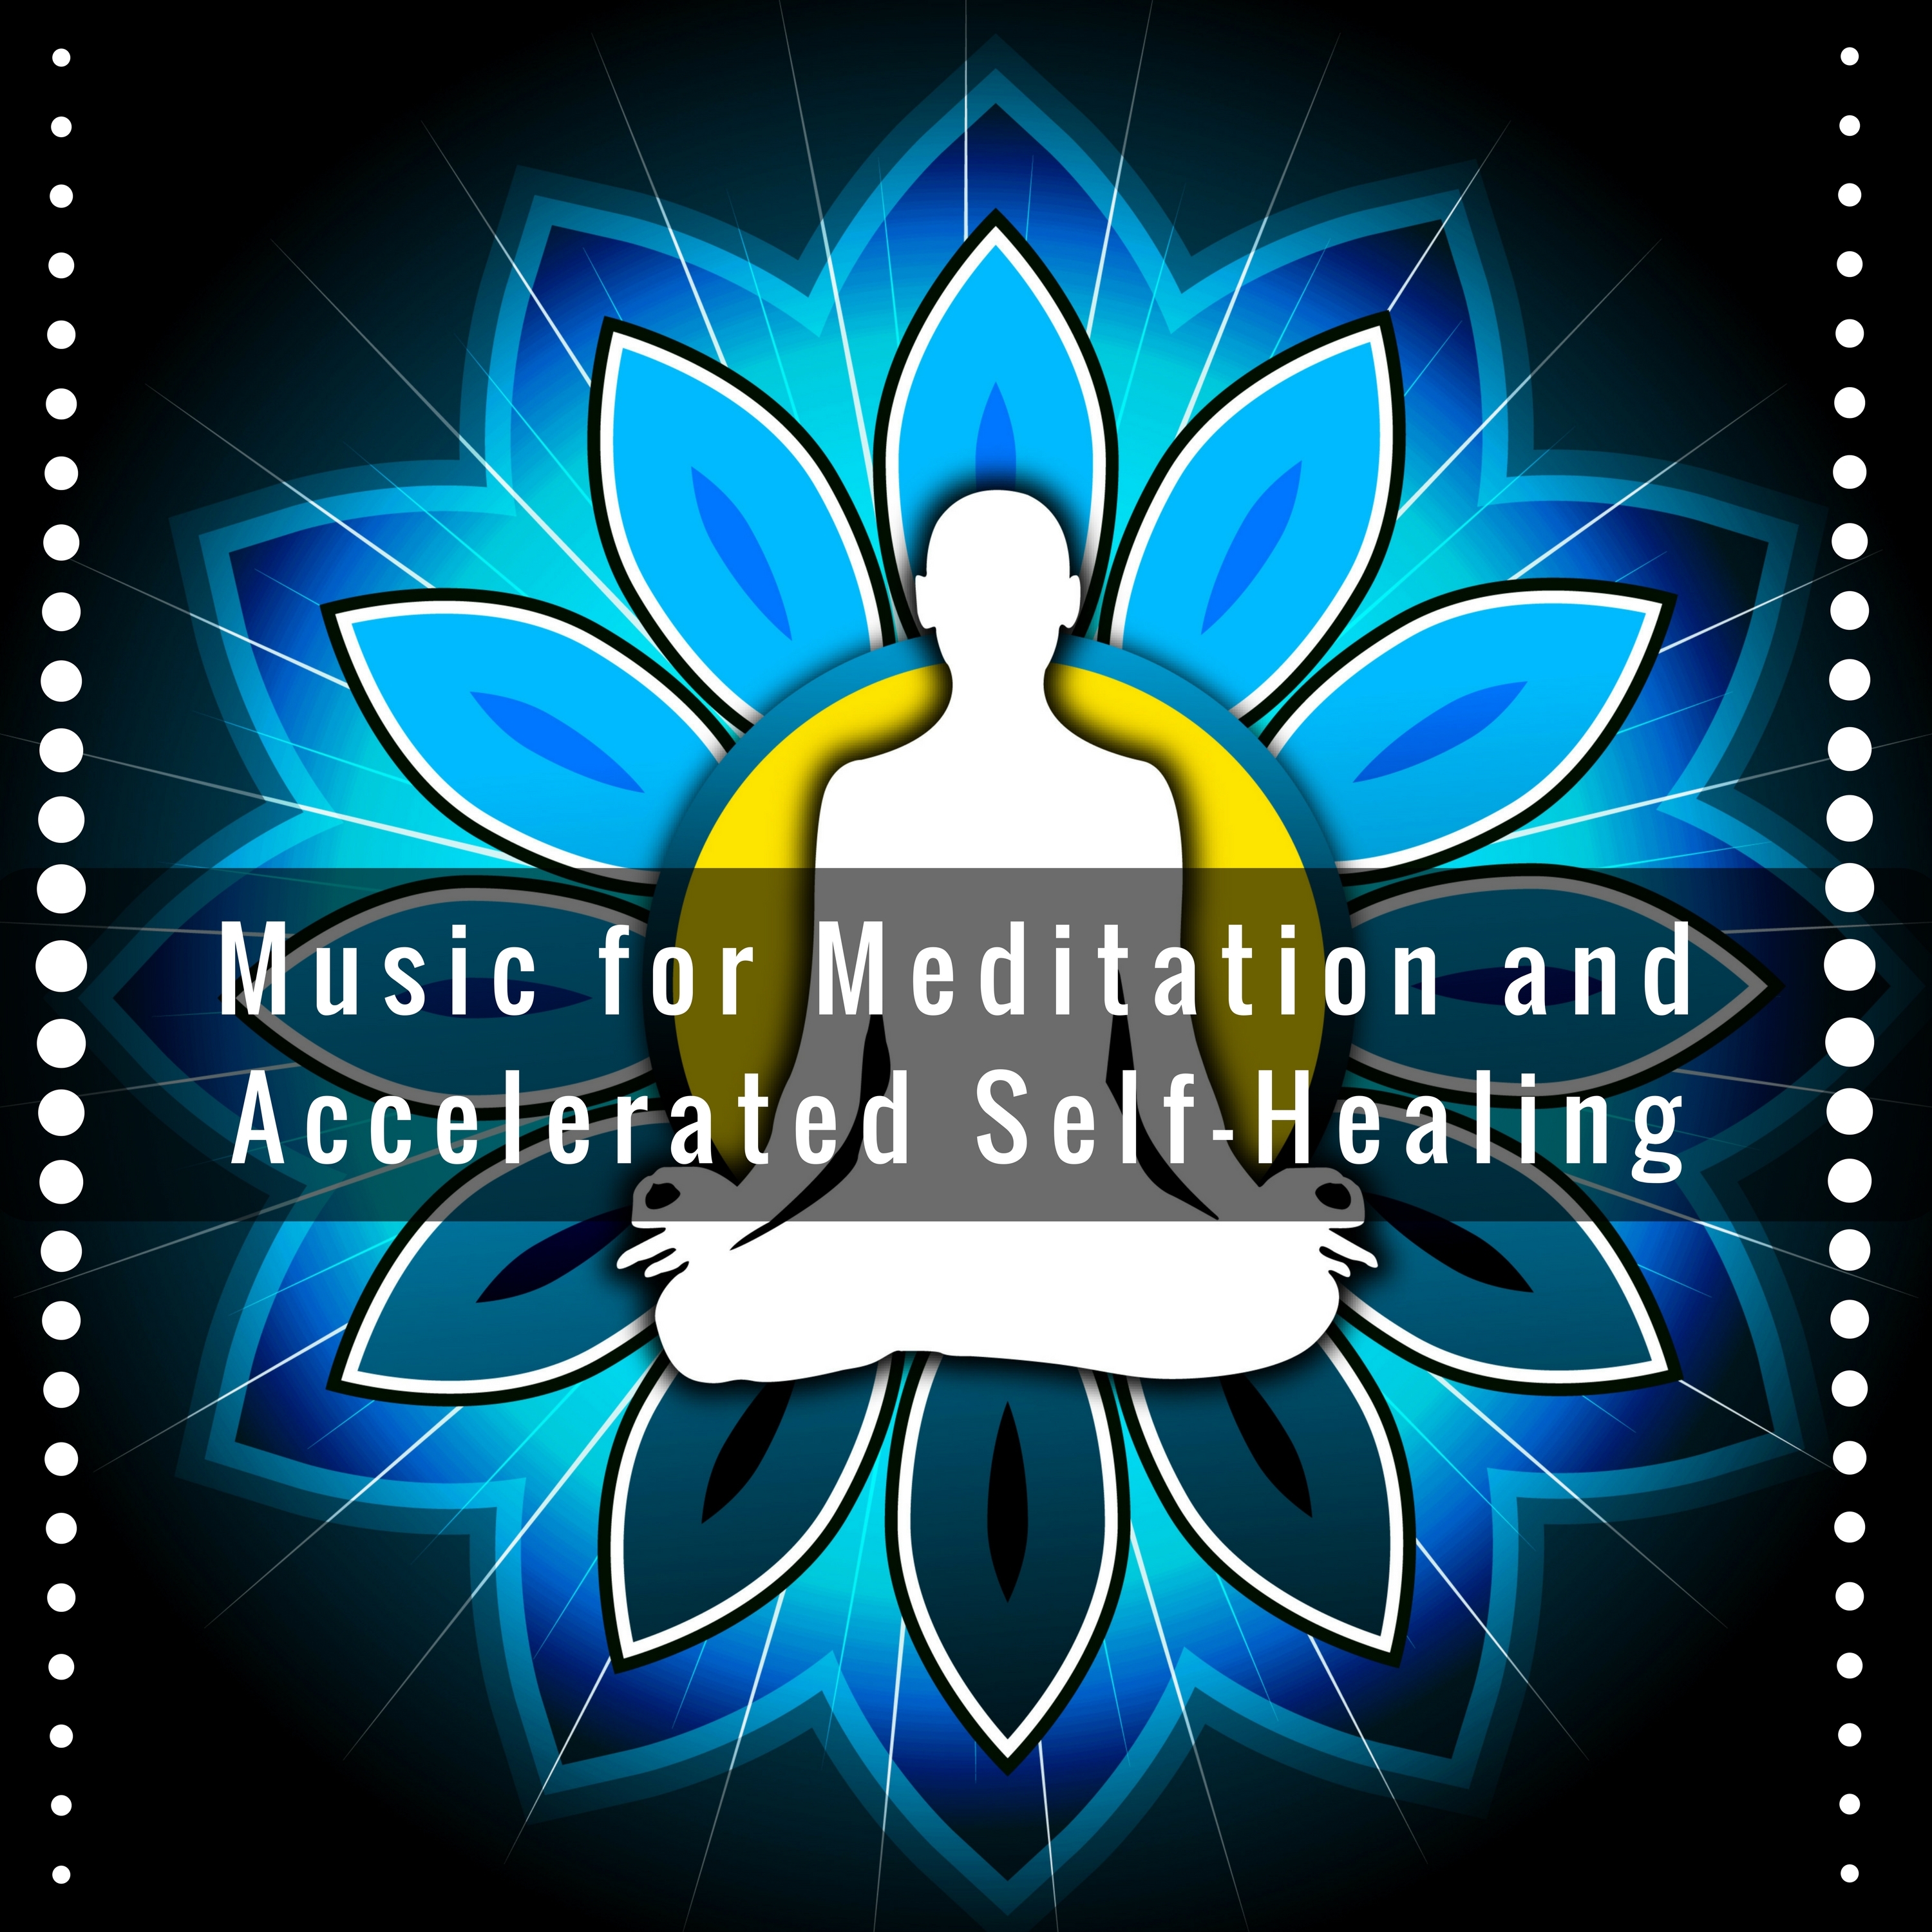 Music for Meditation and Accelerated Self-Healing, Law of Attraction